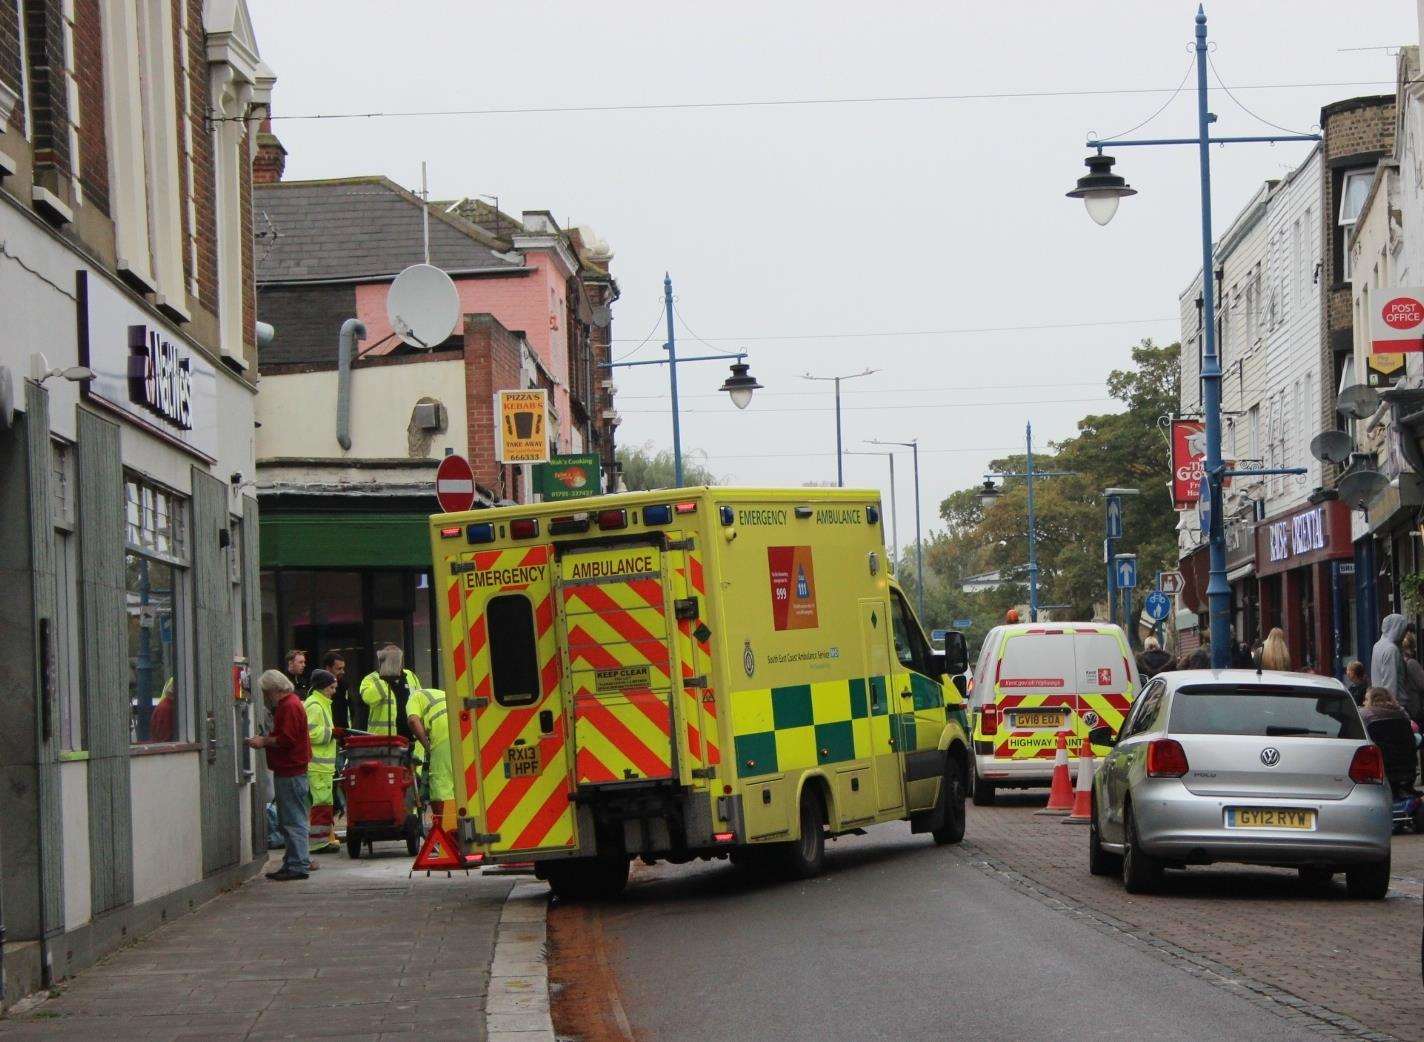 A woman was injured after slipping on oil in Sheerness High Street on Monday